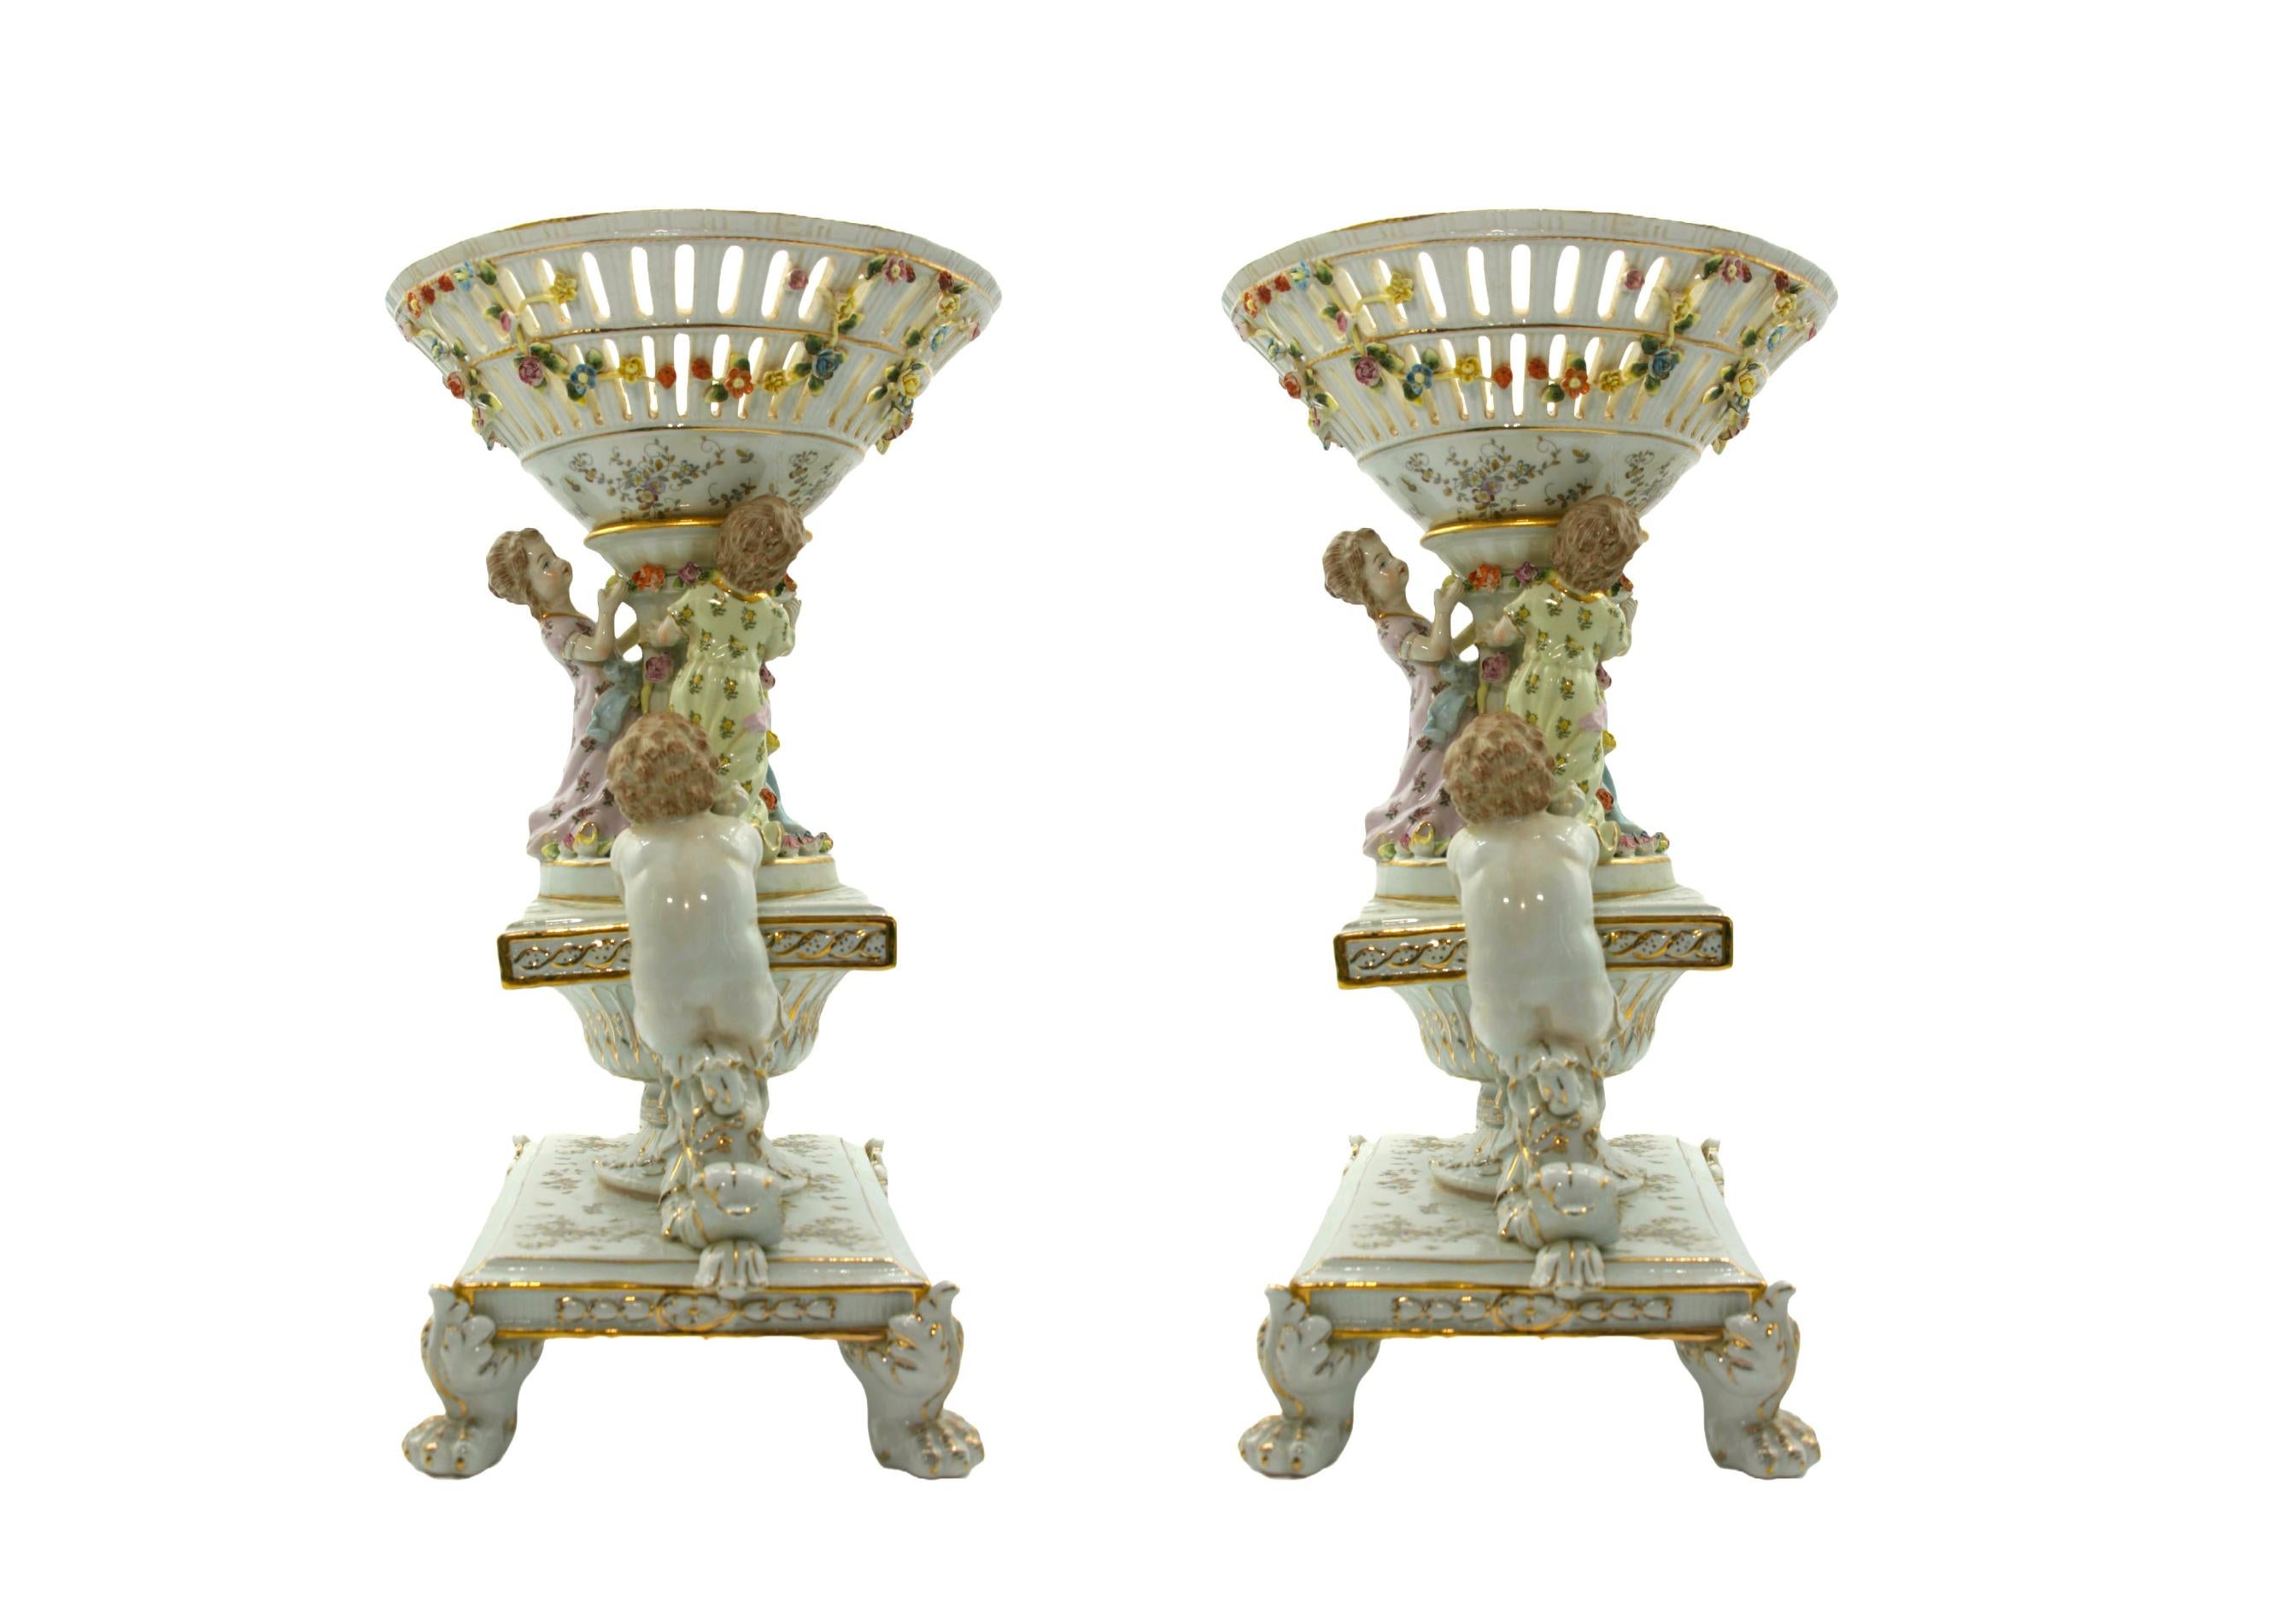 Stunning and beautifully decorated hand painted German porcelain large pair of decorative centerpieces with gold accents . Each centerpiece is in excellent condition . Minor wear consistent with age / use . Each one measures 19 inches tall X 14 1/2